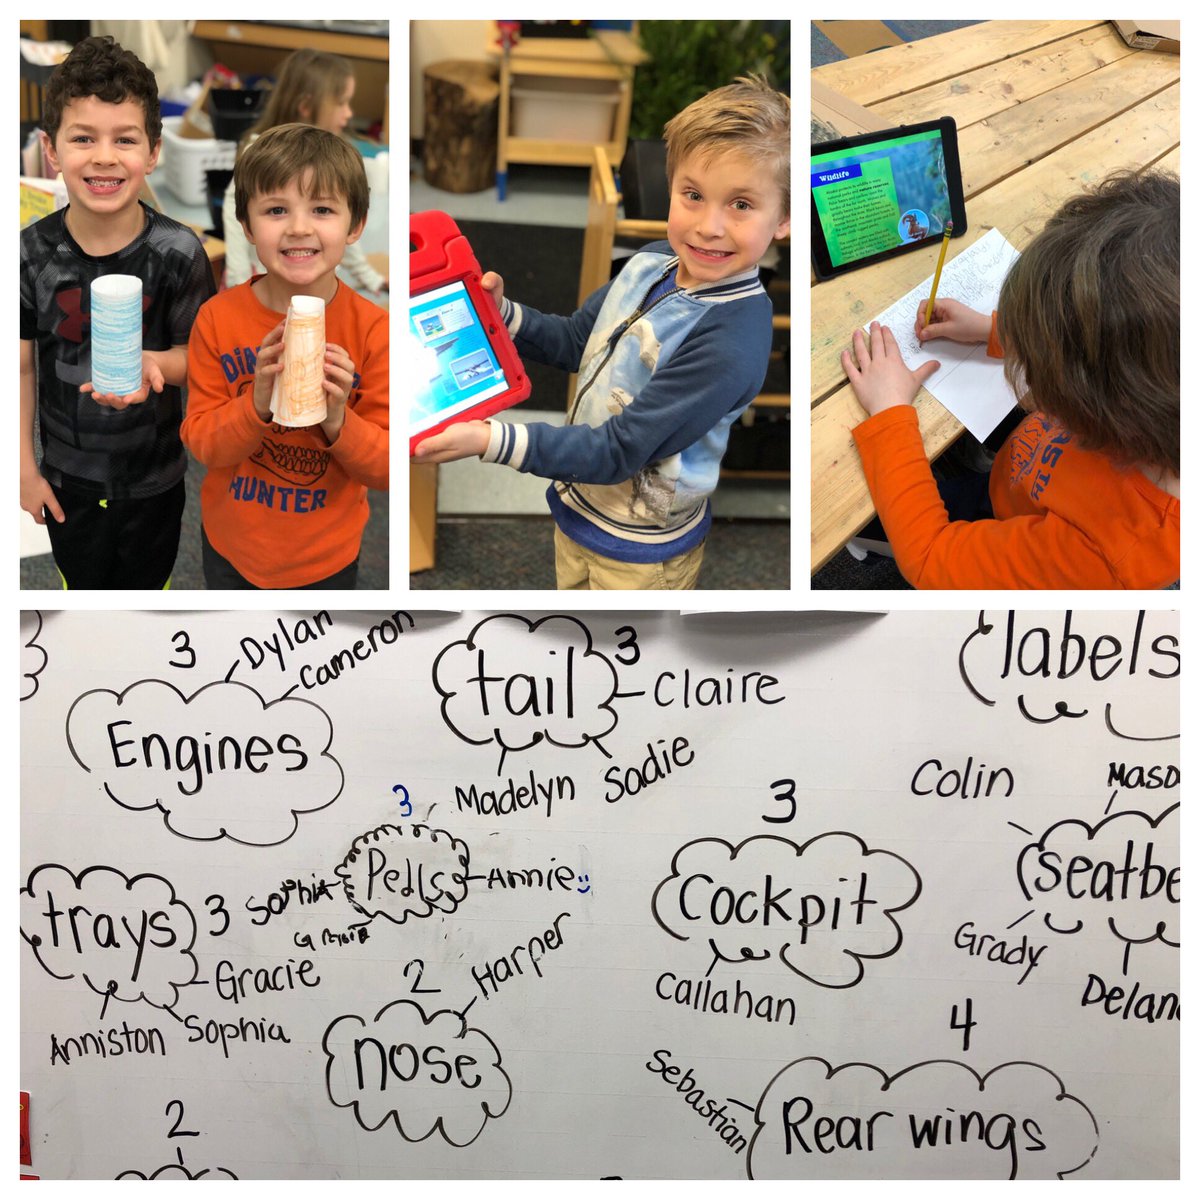 Students planned, researched, collaborated, problem solved and created today. Our project is getting close to being ready to take off! #TCEjoy #projectwork